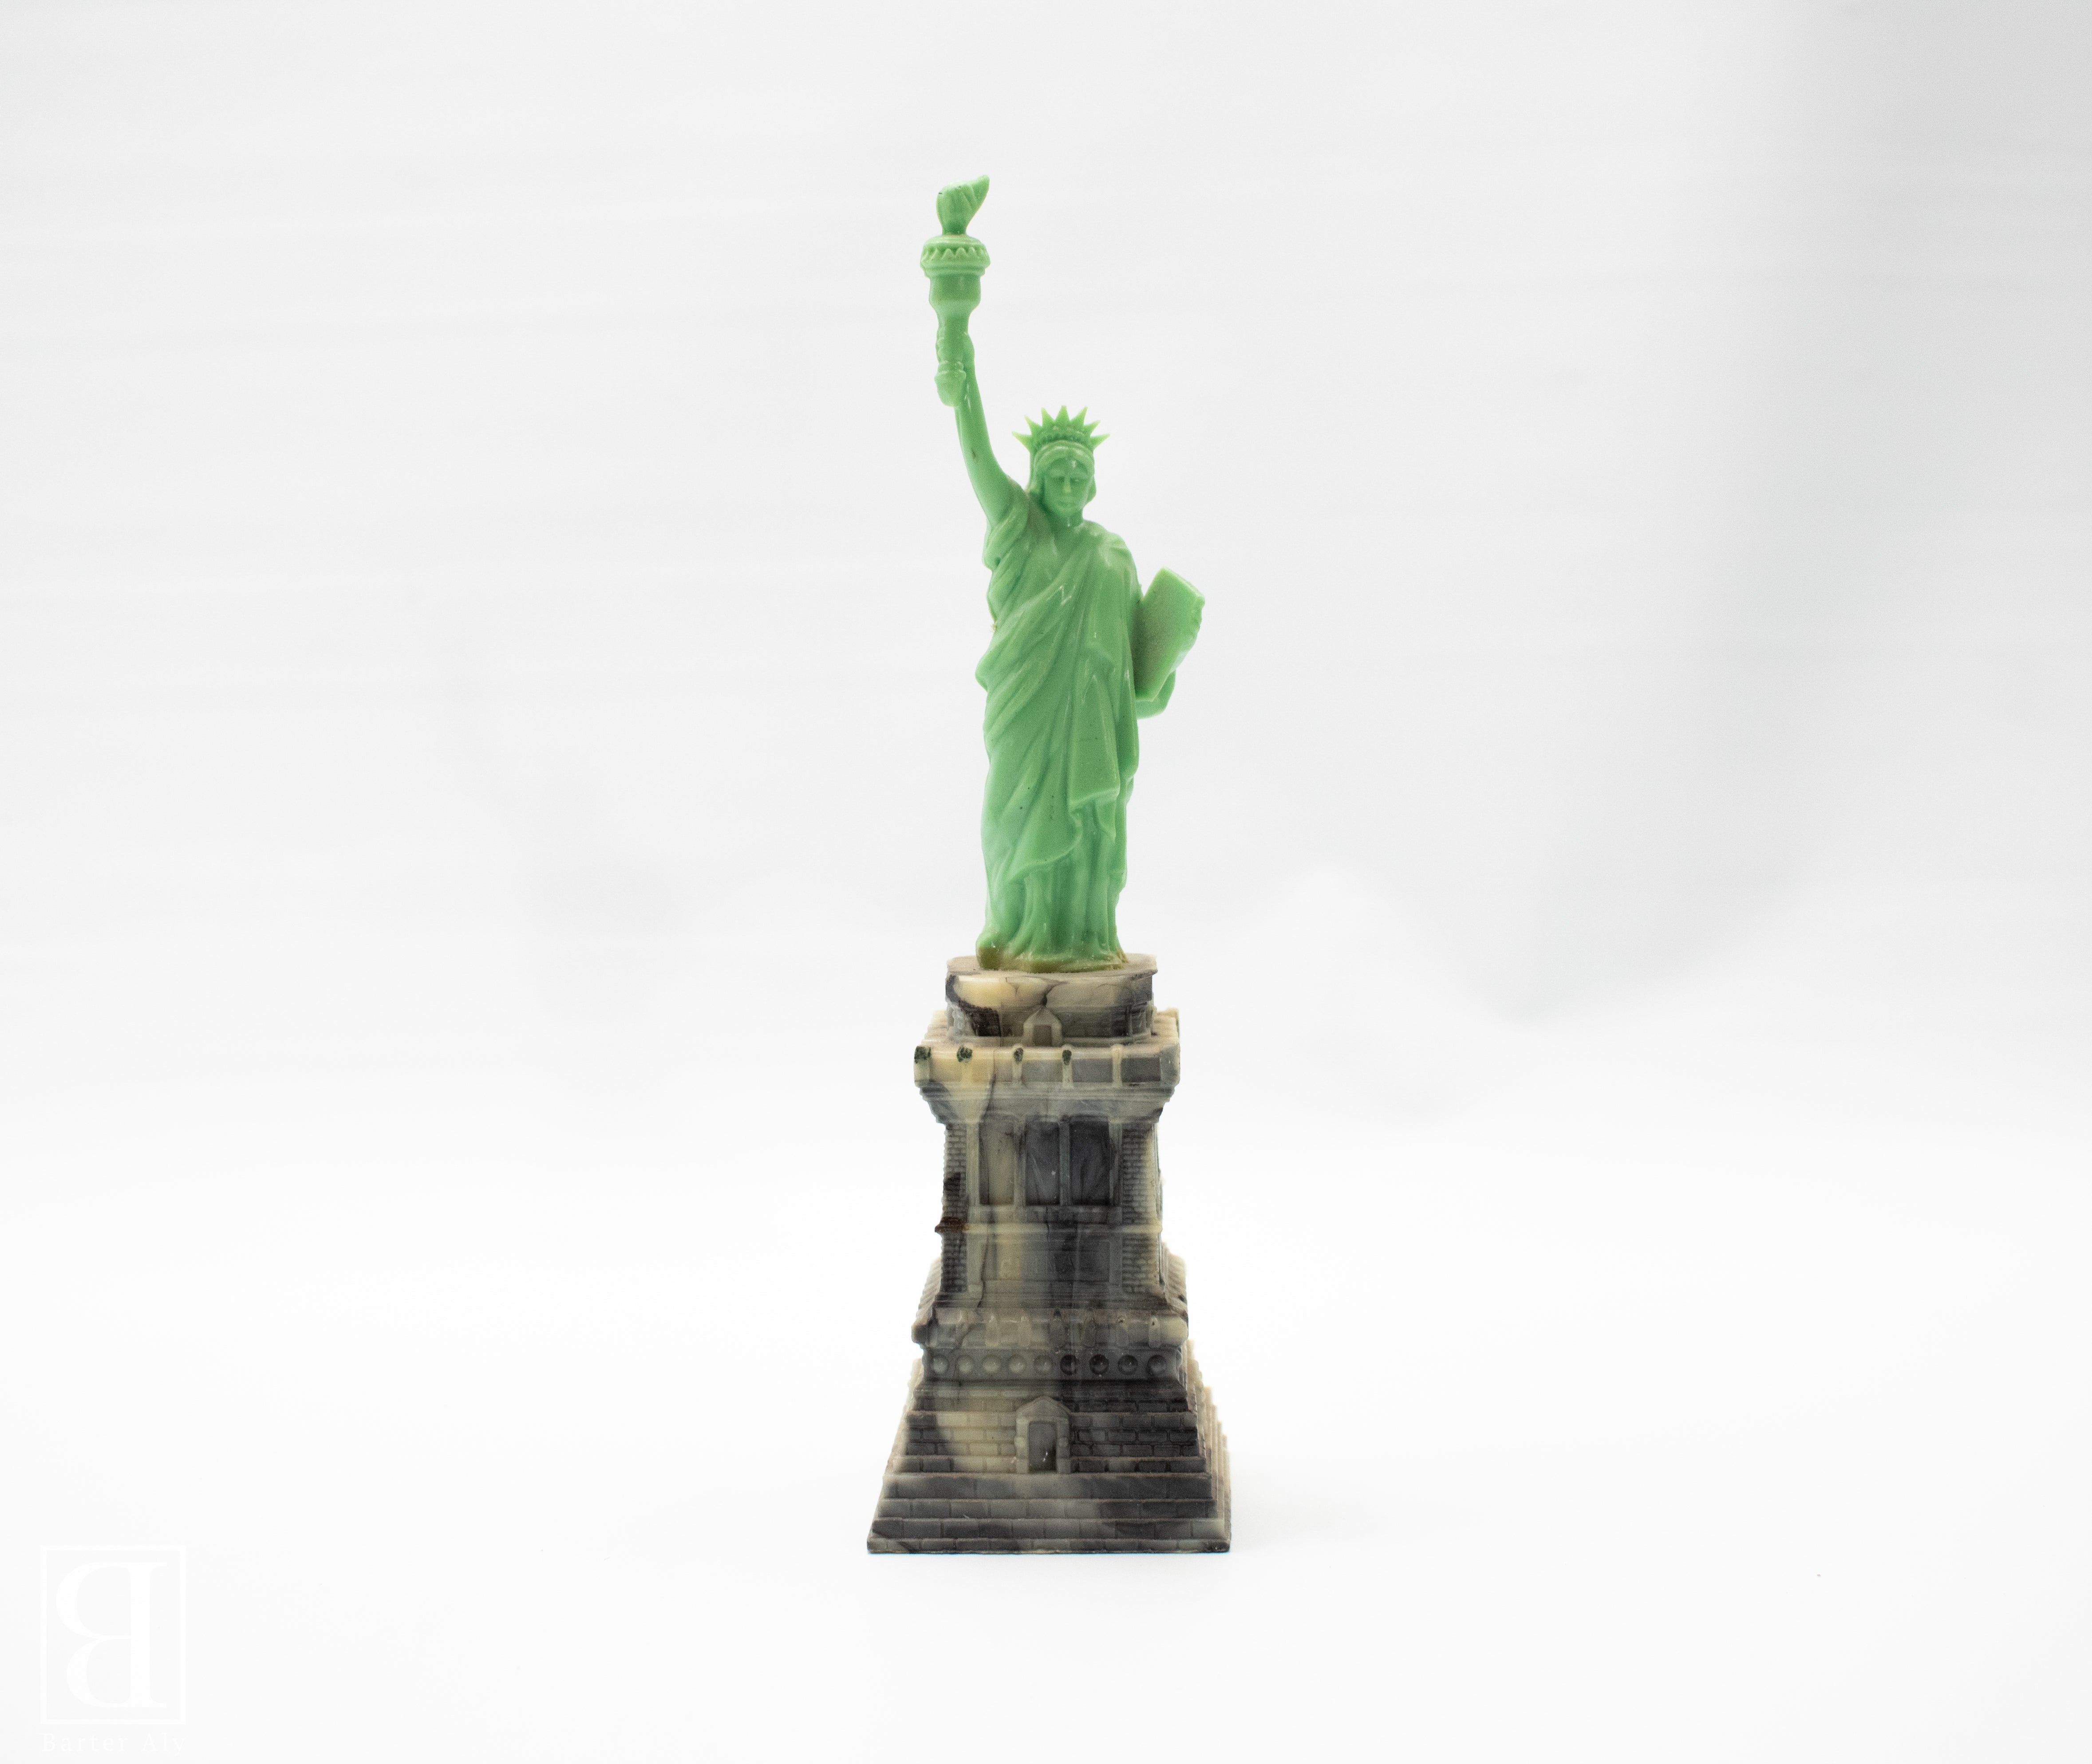 Collectible Statue of Liberty Plastic Figurine Used Statue Green 9 x 2 New York Suvenour